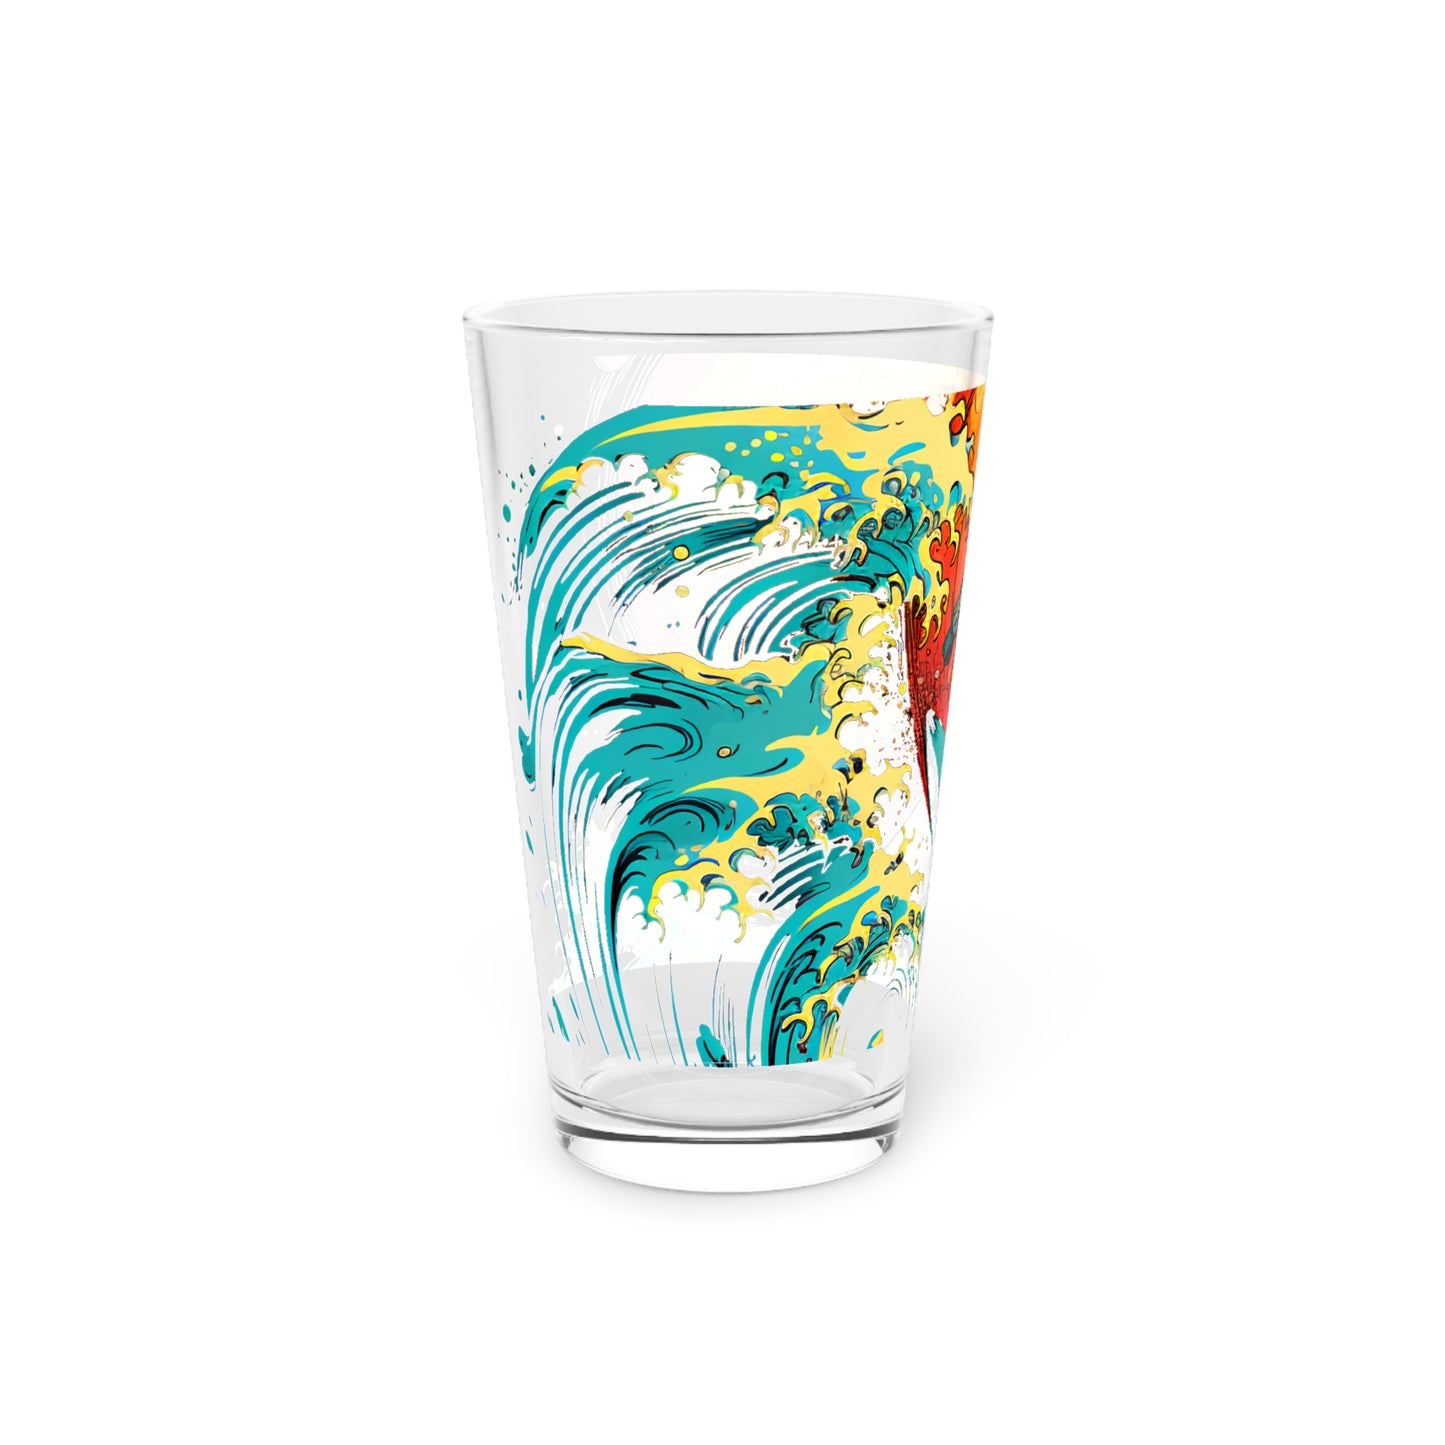 Explore the cosmic waves with our Surfing Astronaut Space Wave Pint Glass, 16oz. Waves Design #067 blends space exploration and surfing excitement in every sip.